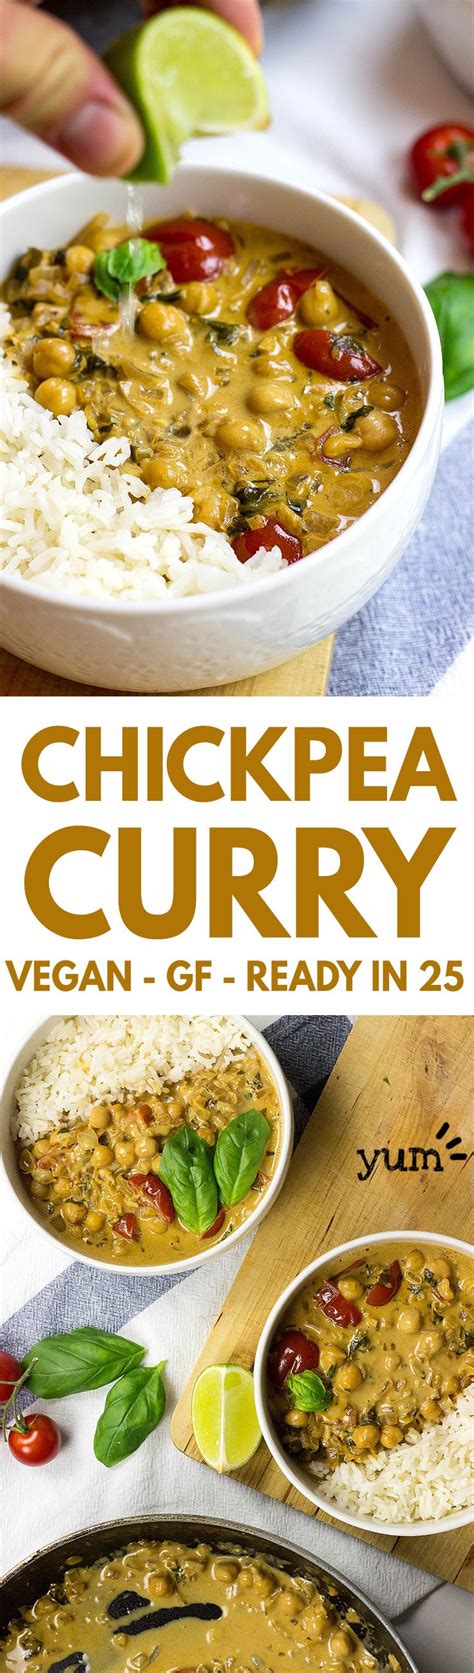 Vegan Chickpea Curry Recipe Chickpea Curry Curry And